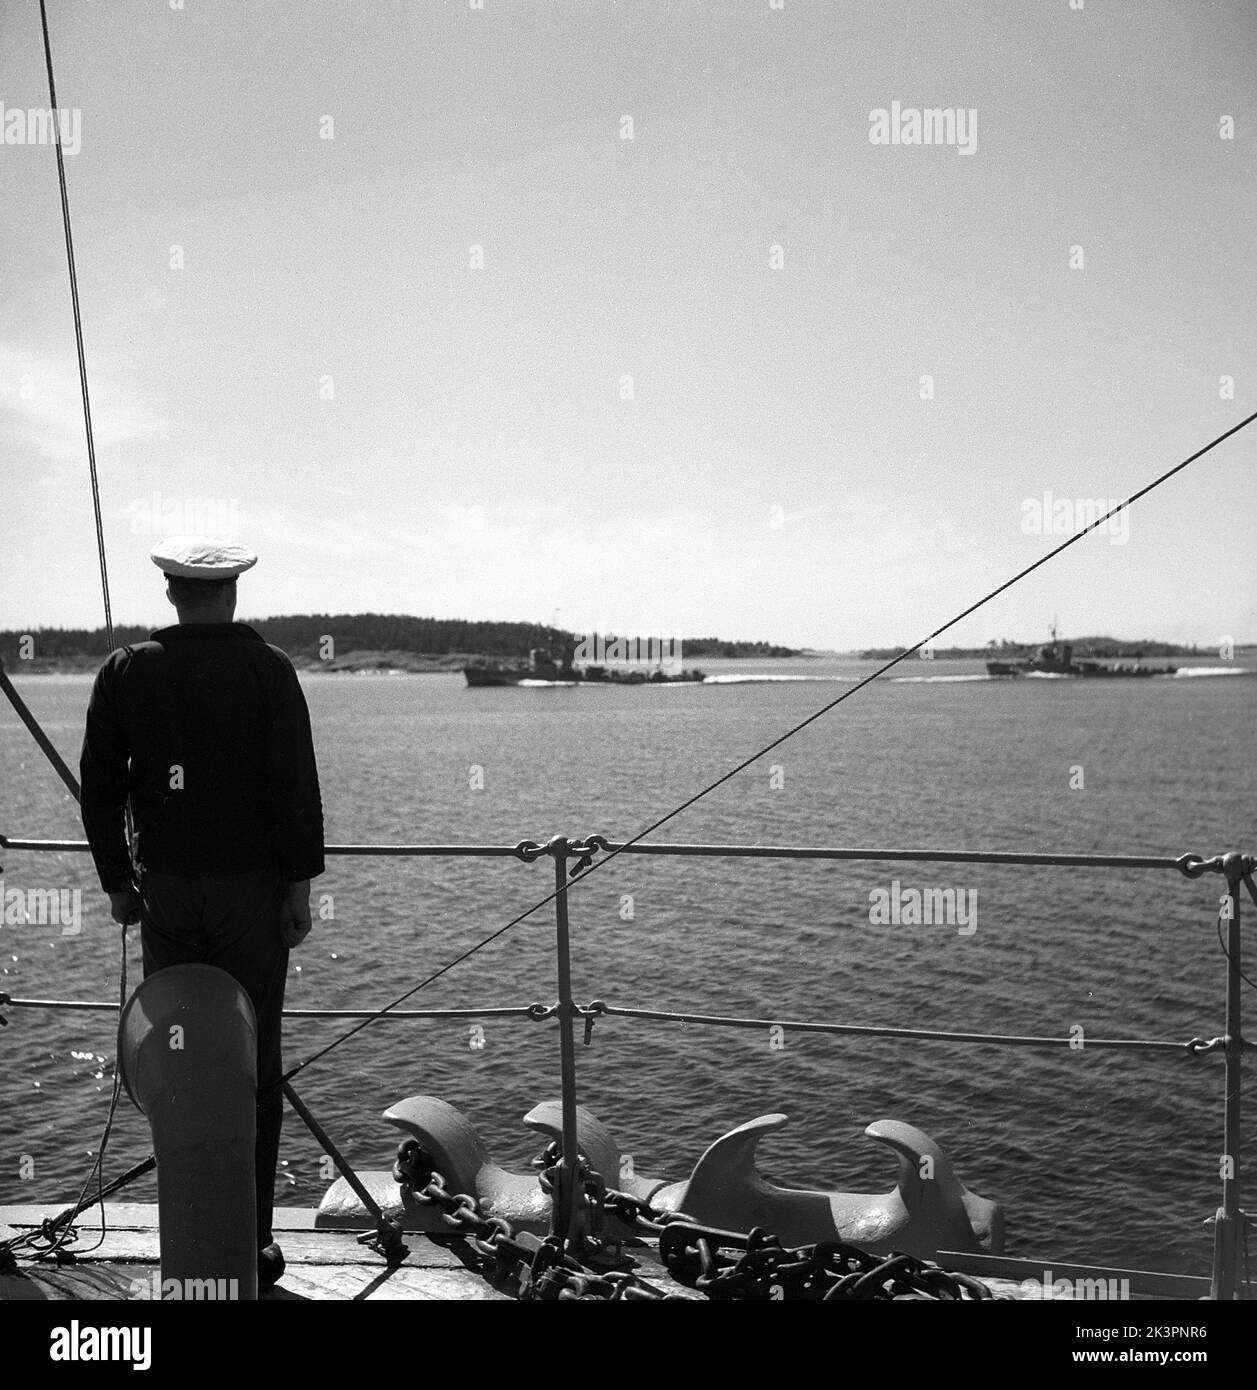 During World war II. The war ship Sverige during navy exercises at sea. Detail of a sailor standing in attention on deck with his eyes on two other swedish warships cruising on the side. Sweden june 1940. Kristoffersson ref 141 Stock Photo